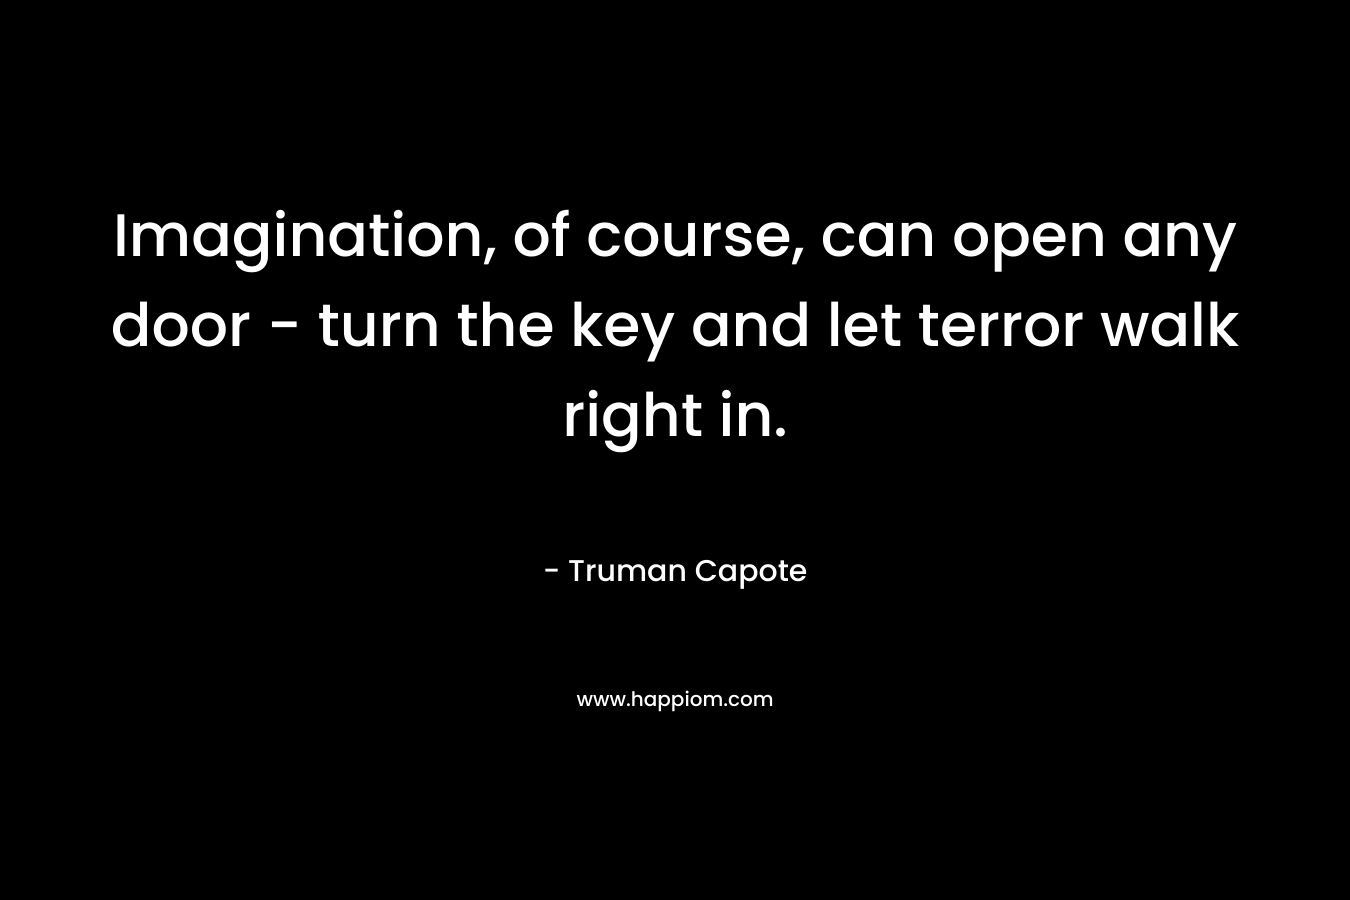 Imagination, of course, can open any door - turn the key and let terror walk right in.